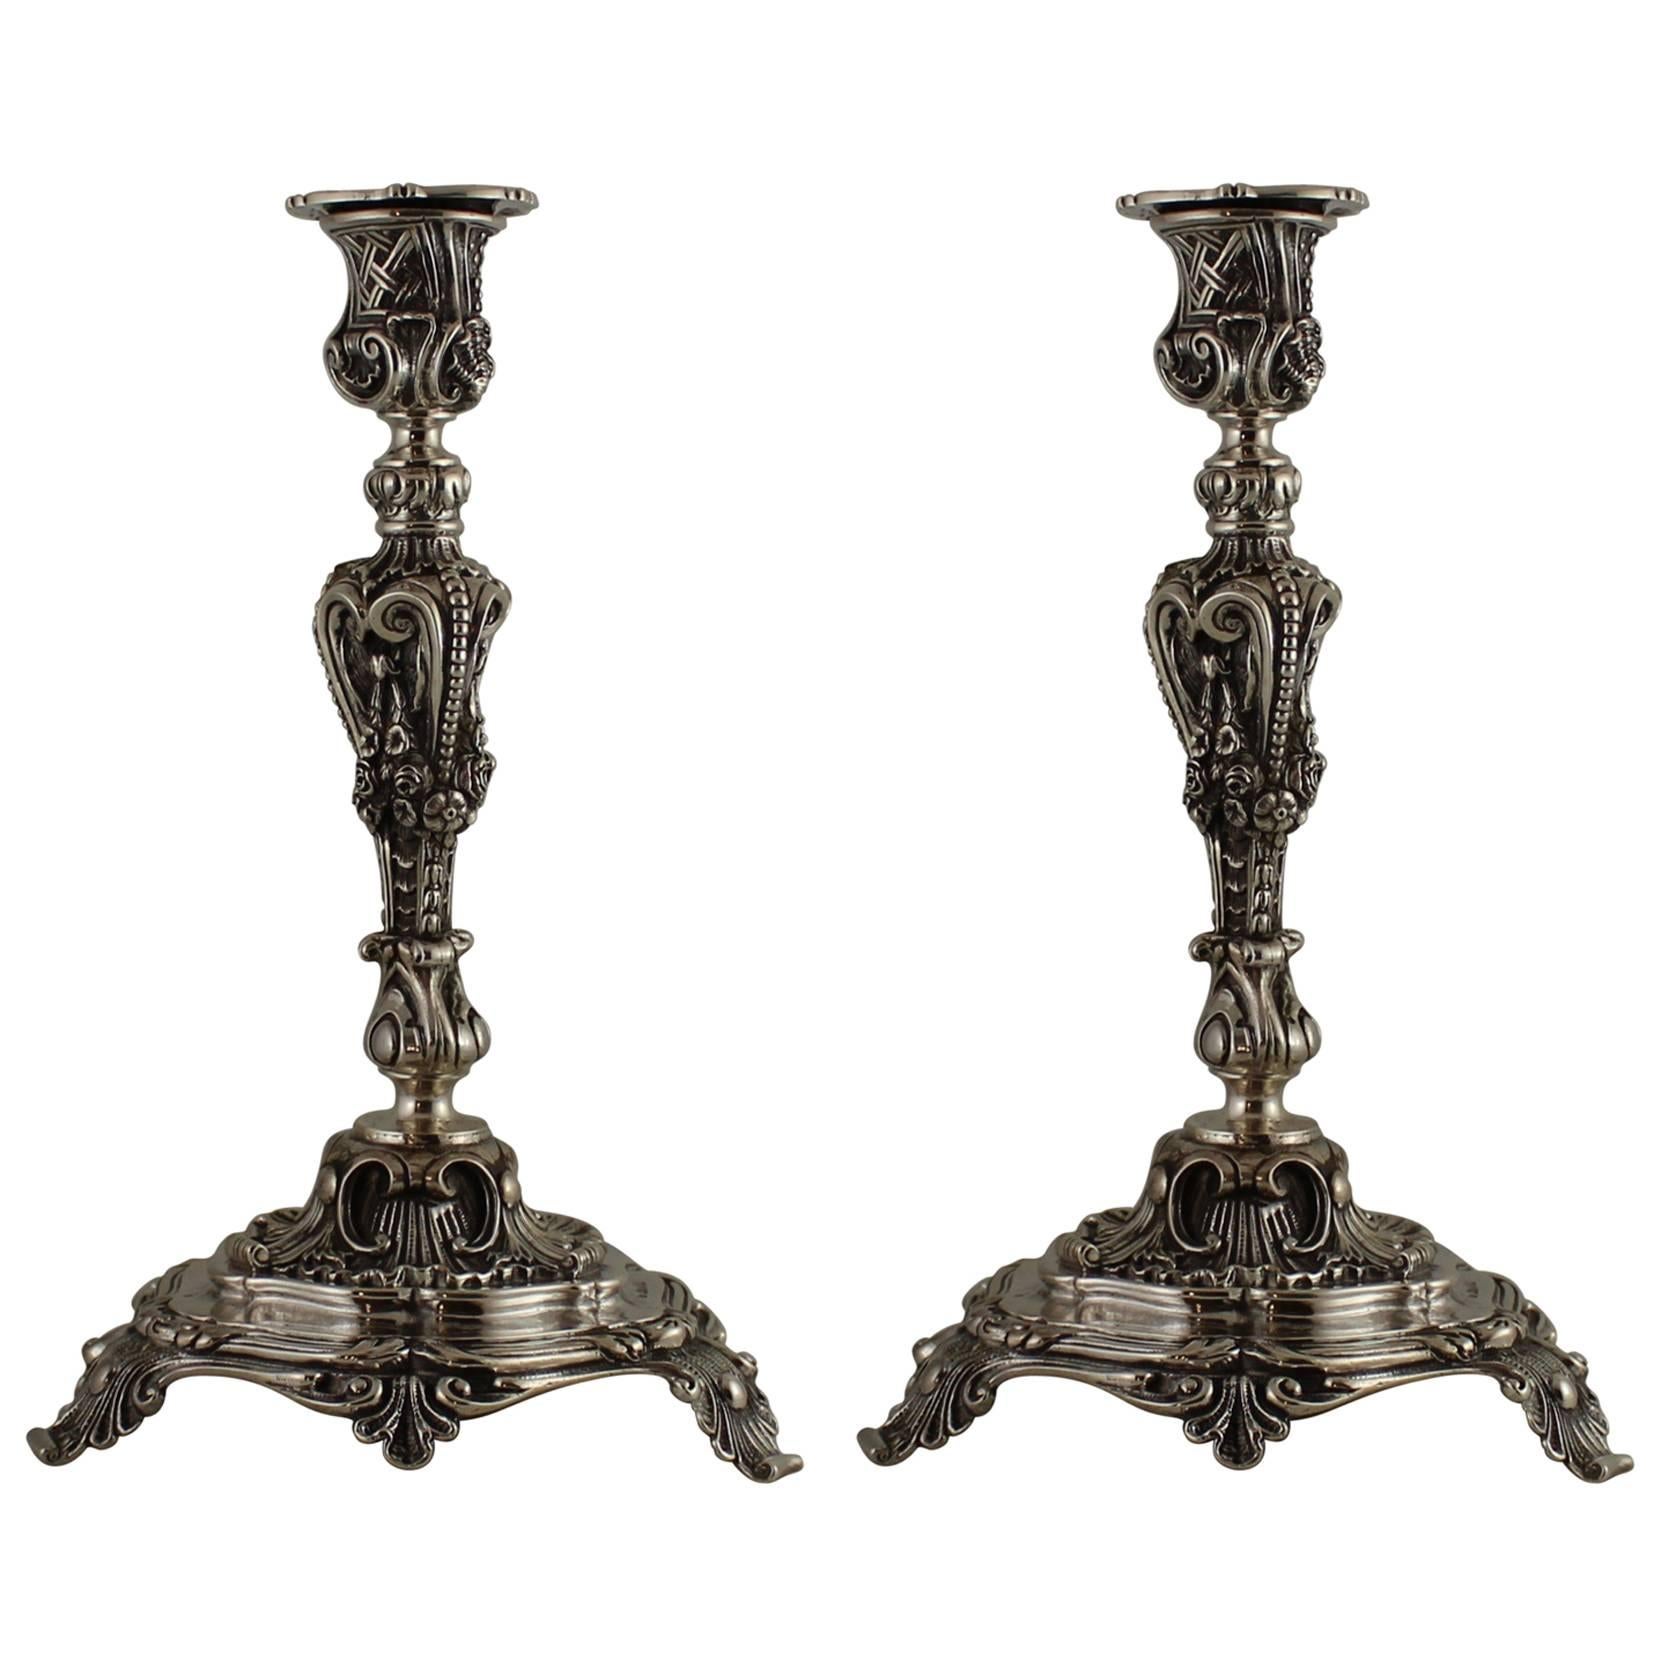 Pair of John George Smith English Sterling Silver Candlesticks